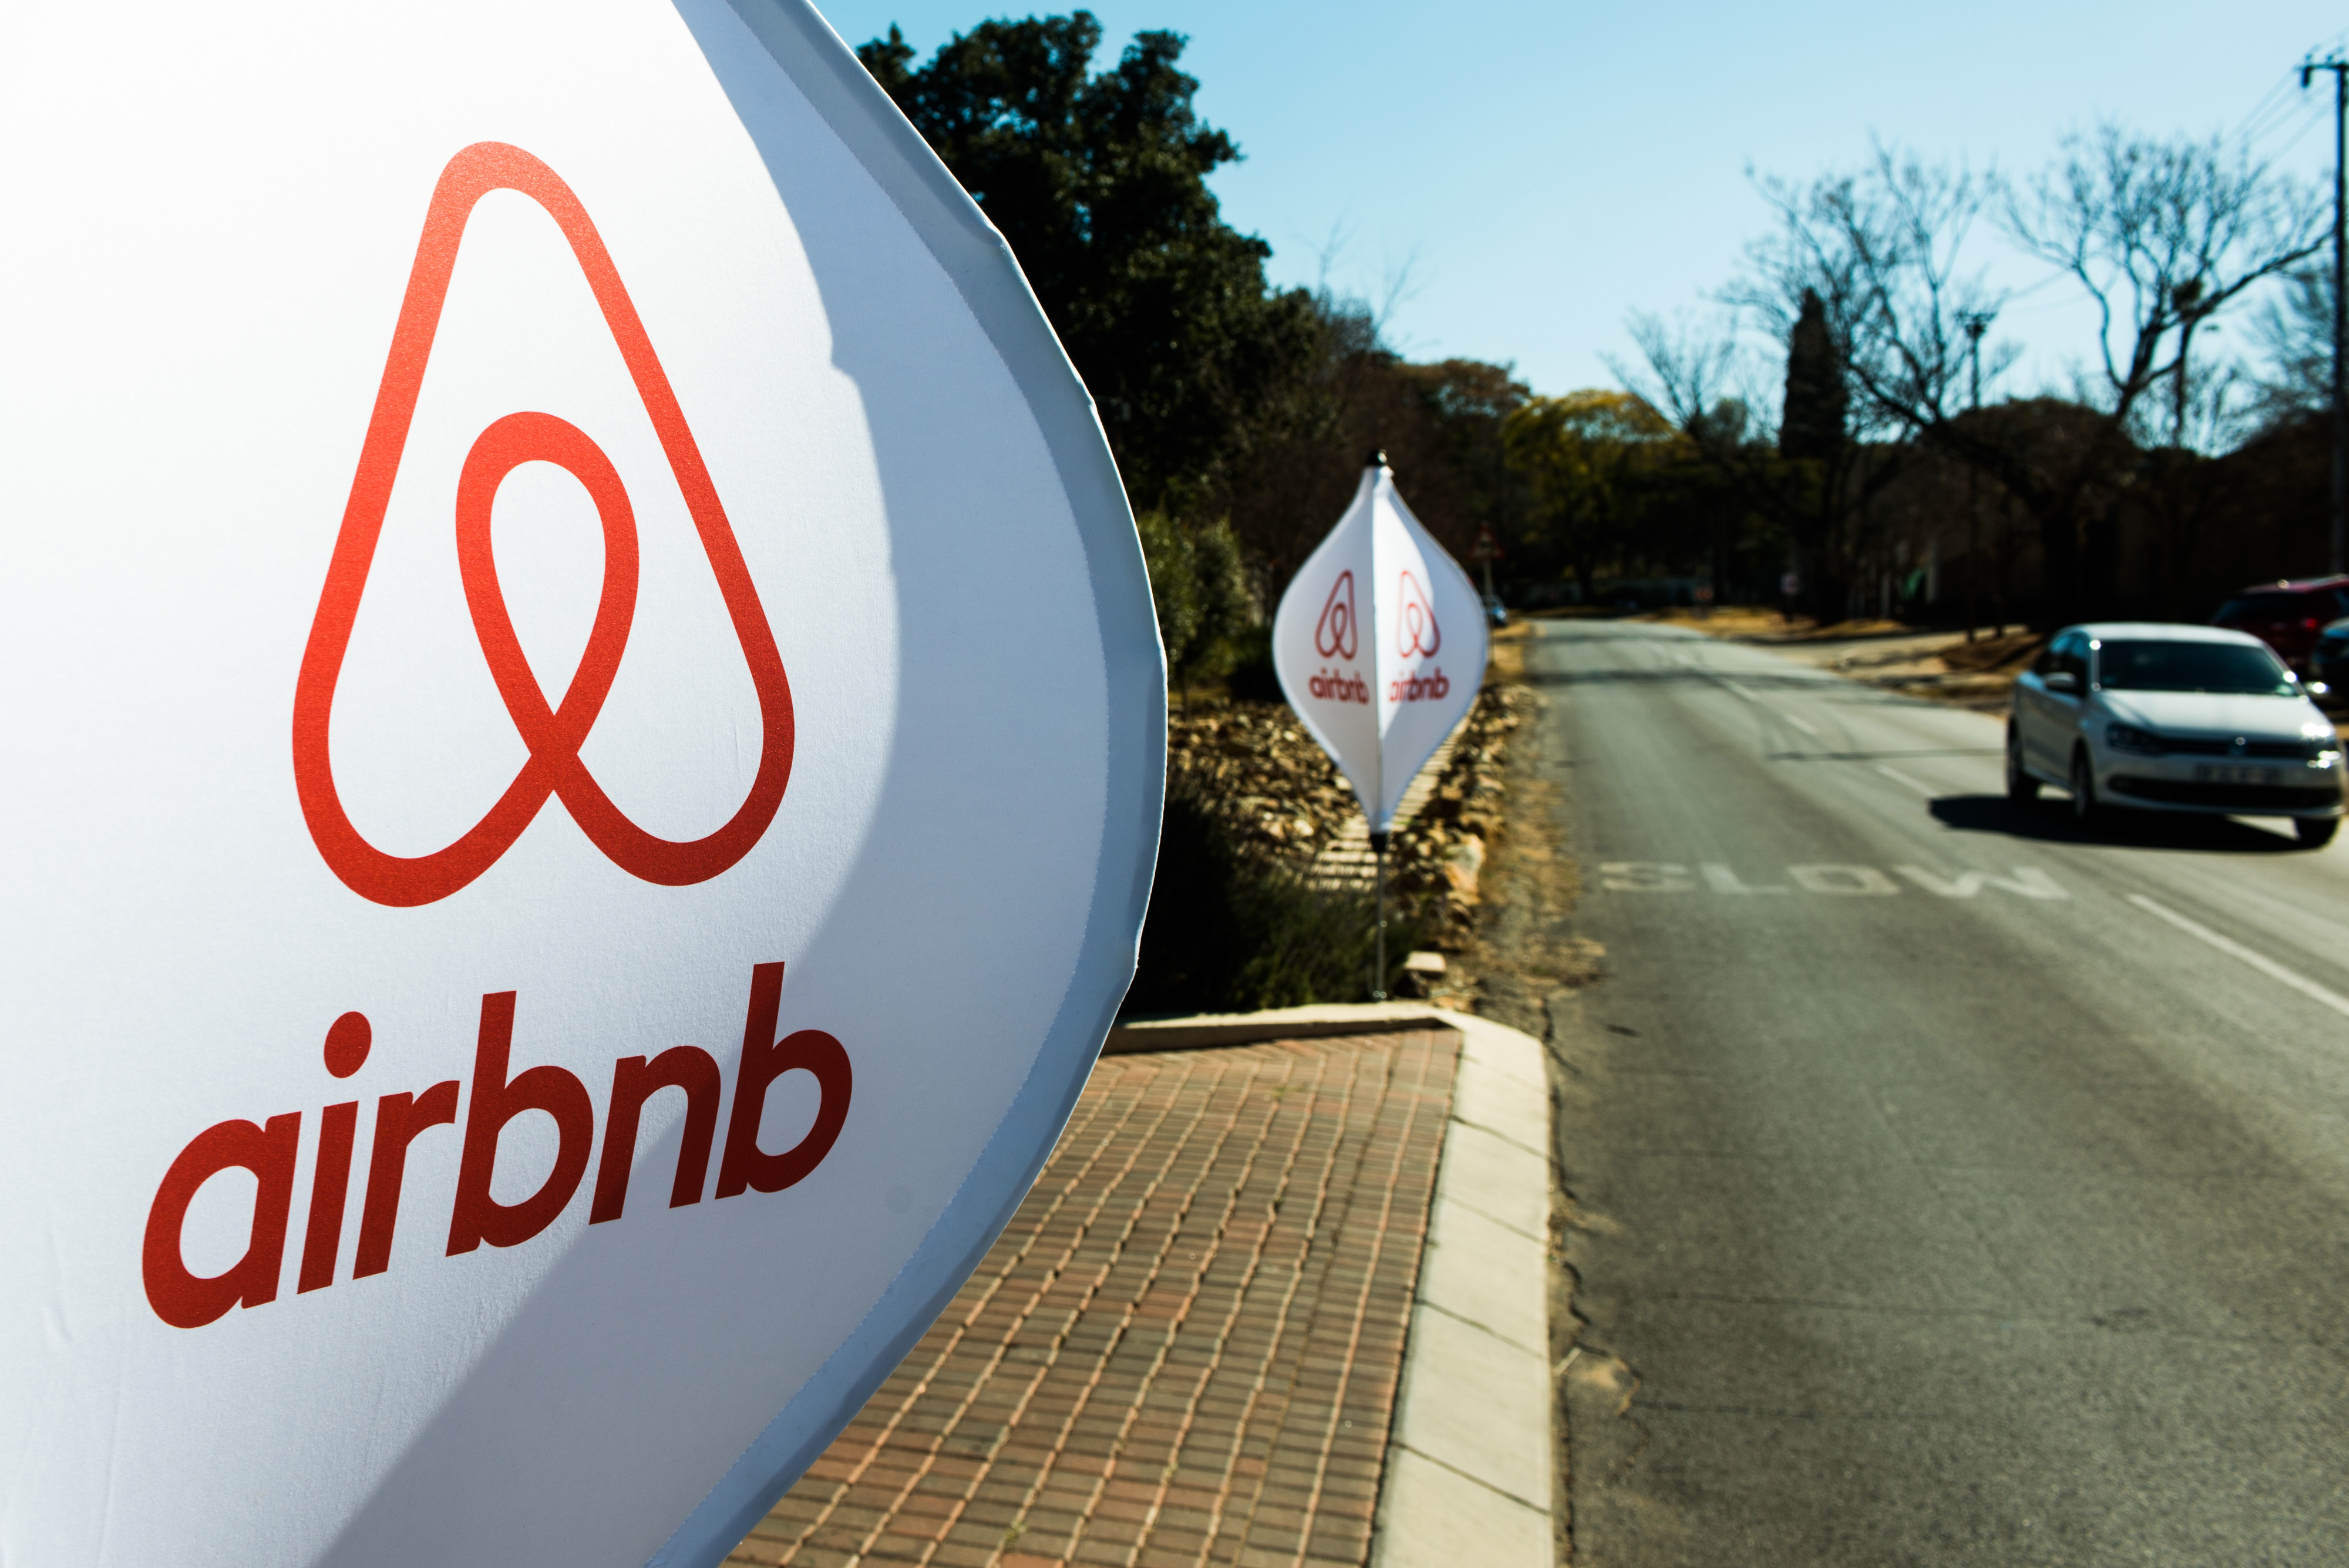 The logos of Airbnb sit on banners displayed outside a media event in Johannesburg on July 27, 2015 (Waldo Swiegers)